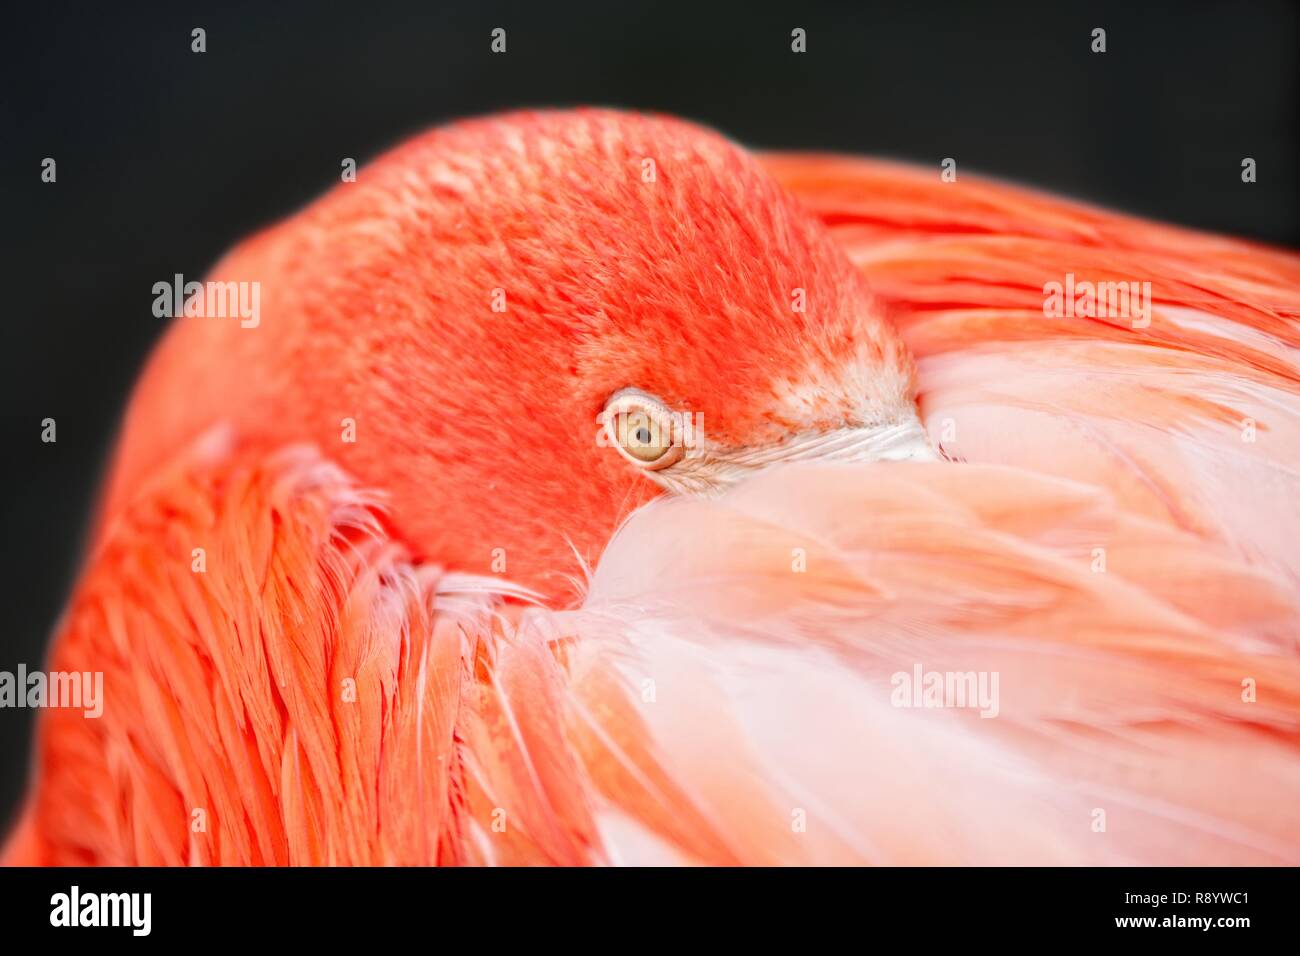 Closeup of a flamingo - Living Coral color with black background. Stock Photo